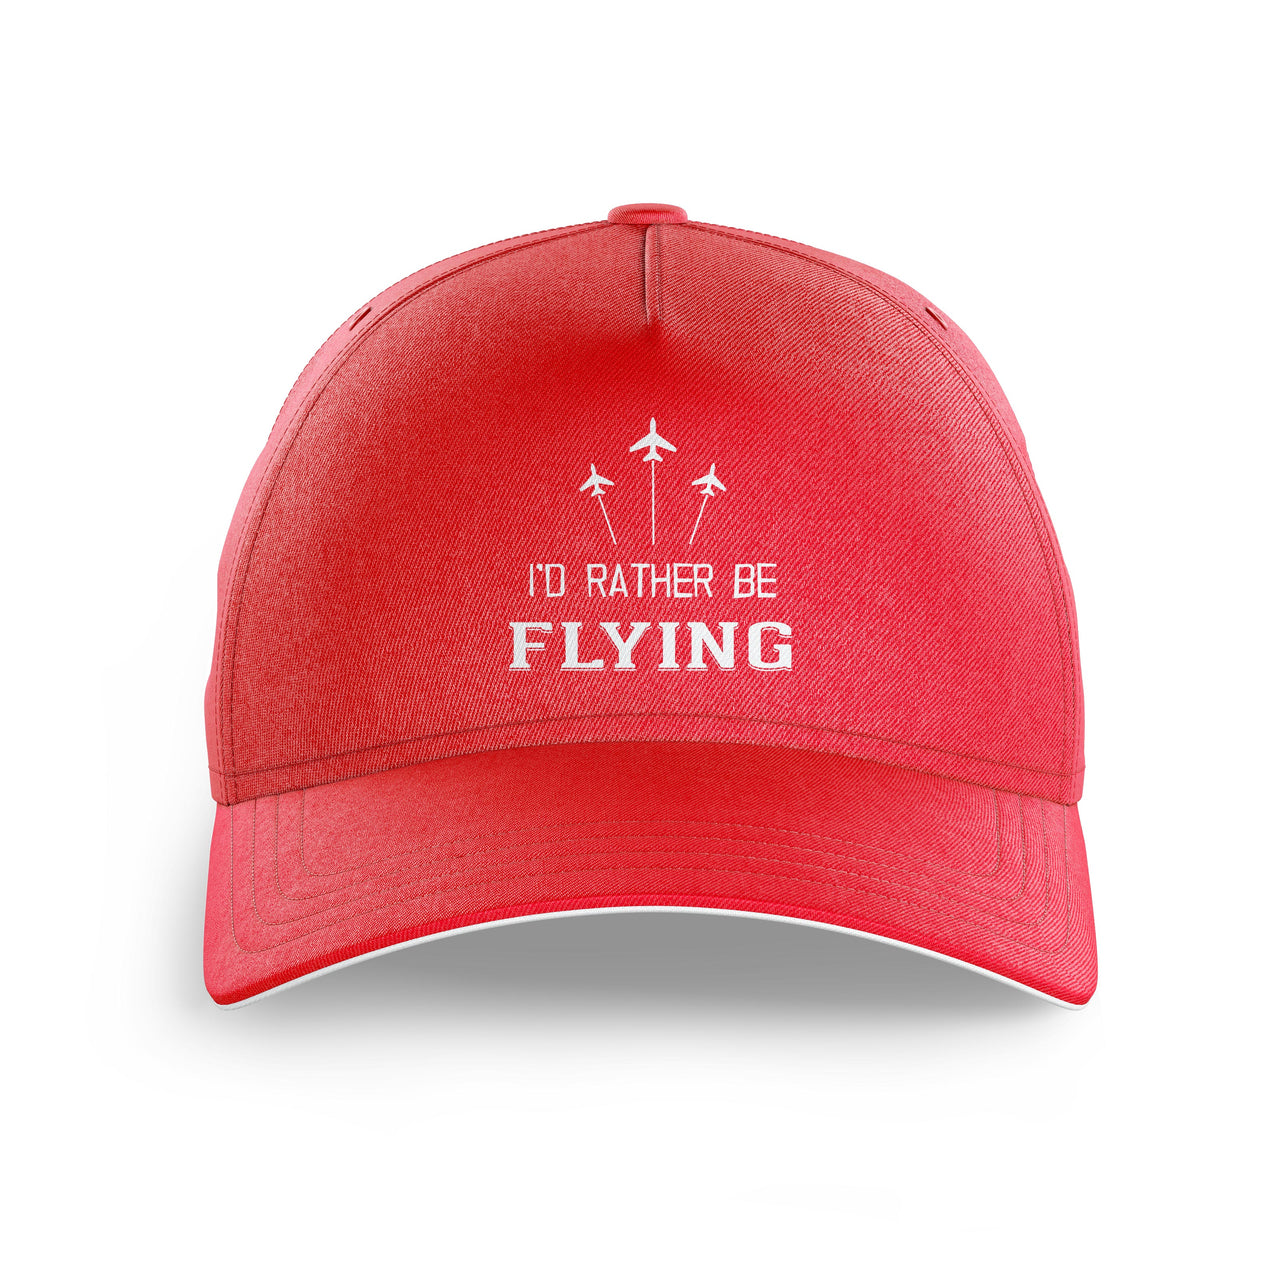 I'D Rather Be Flying Printed Hats